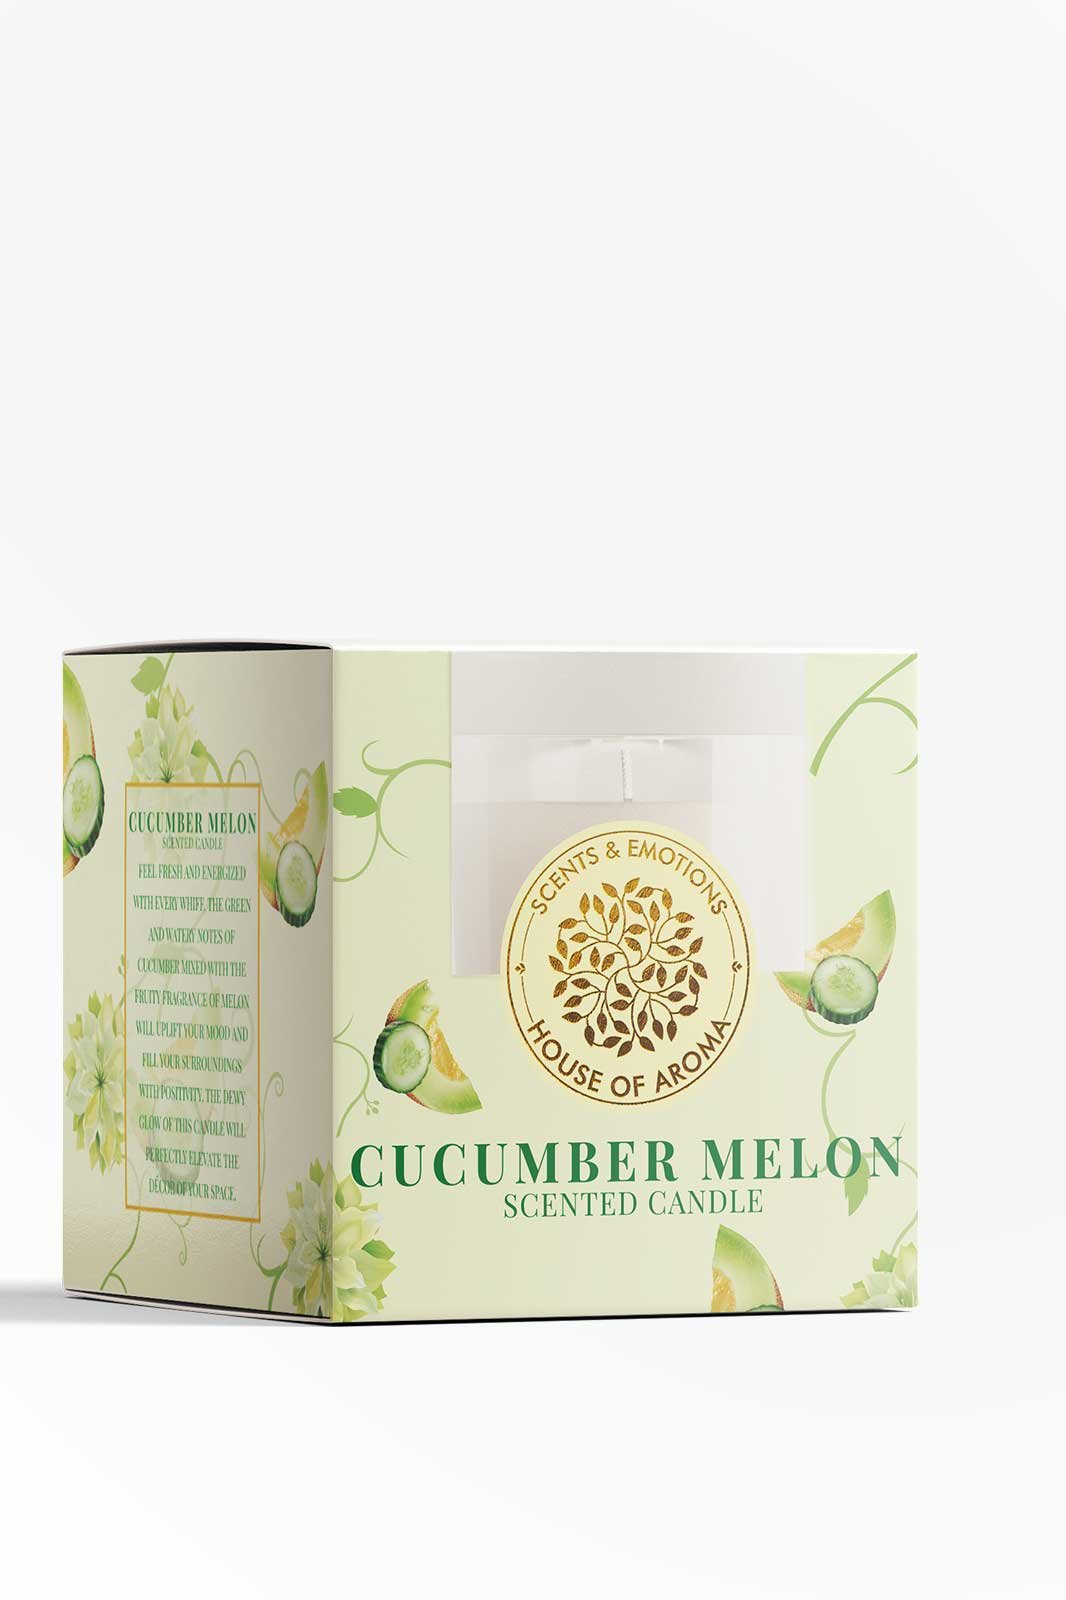 cucumber candle, cucumber scented candle, cucumber aloe candle, cucumber candle scent, cucumber candles, cucumber citrus candle, cucumber fragrance candles, cucumber lily candle, cucumber melon candles, cucumber melon scented candles, House of Aroma, scented candles online, home decor scented candles, organic scented candles, online scented candles, home decor candle, buy scented candles online, room decor candles, best scented candles online, organic candles India, aroma candles online India, organic scents for candles, organic soy candles, natural scented beeswax candles, benefits scented candles, aroma candles buy online, scented candles for home decor, best scents of candles, organic natural scented candles, home decor aroma candles, scented candles order online, organic soy candle wax, best home scented candles, best organic scented candles, organic scented oils, best fragrance scented candles, organic aroma for candles, organic soy for candles, aroma scented candles, scented candle brand, aroma diffuser candle, essential oil for scented candles, aroma candles gift set, best aroma candles in India